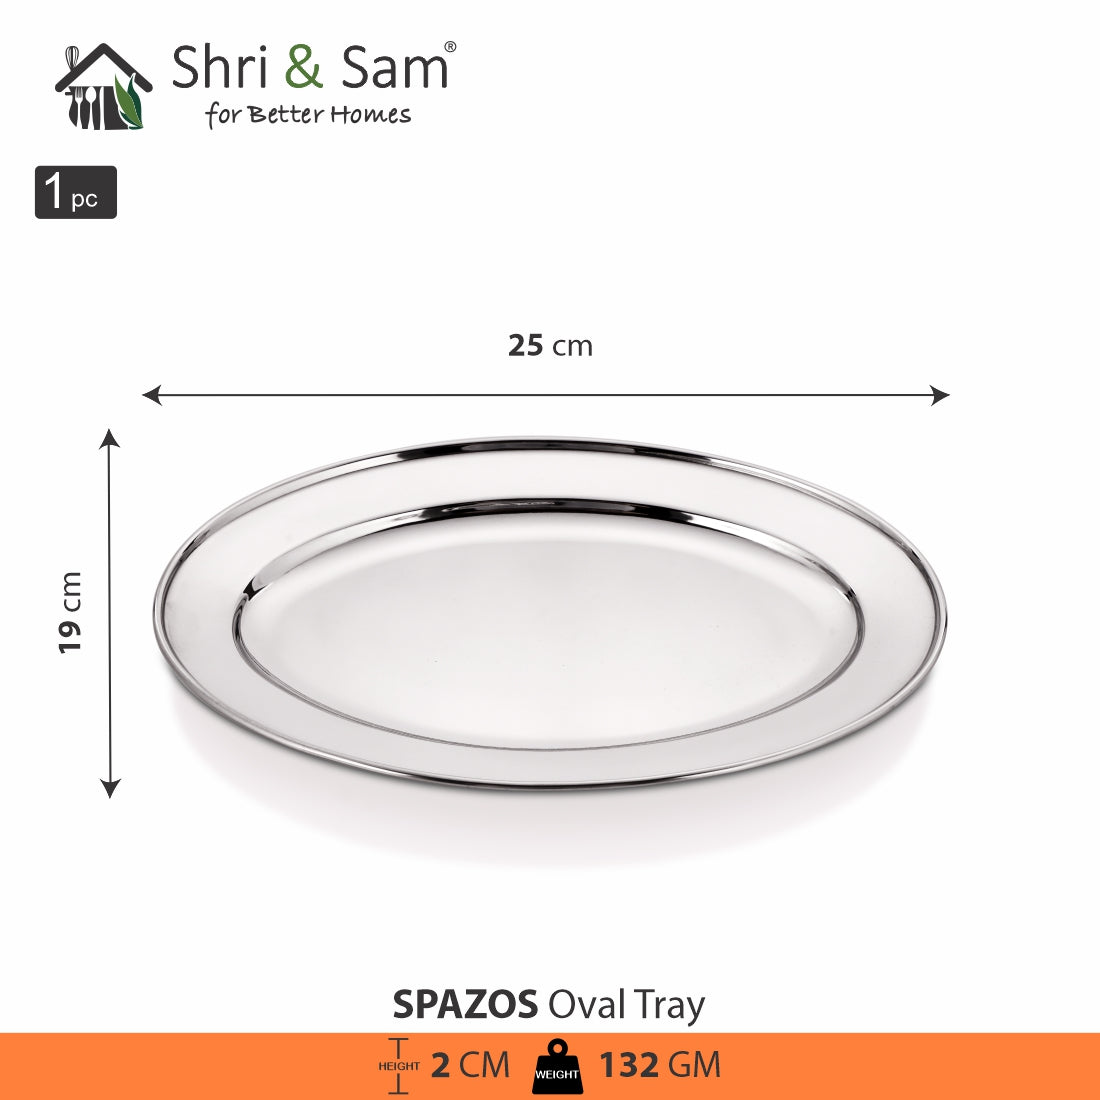 Stainless Steel Oval Tray Spazos